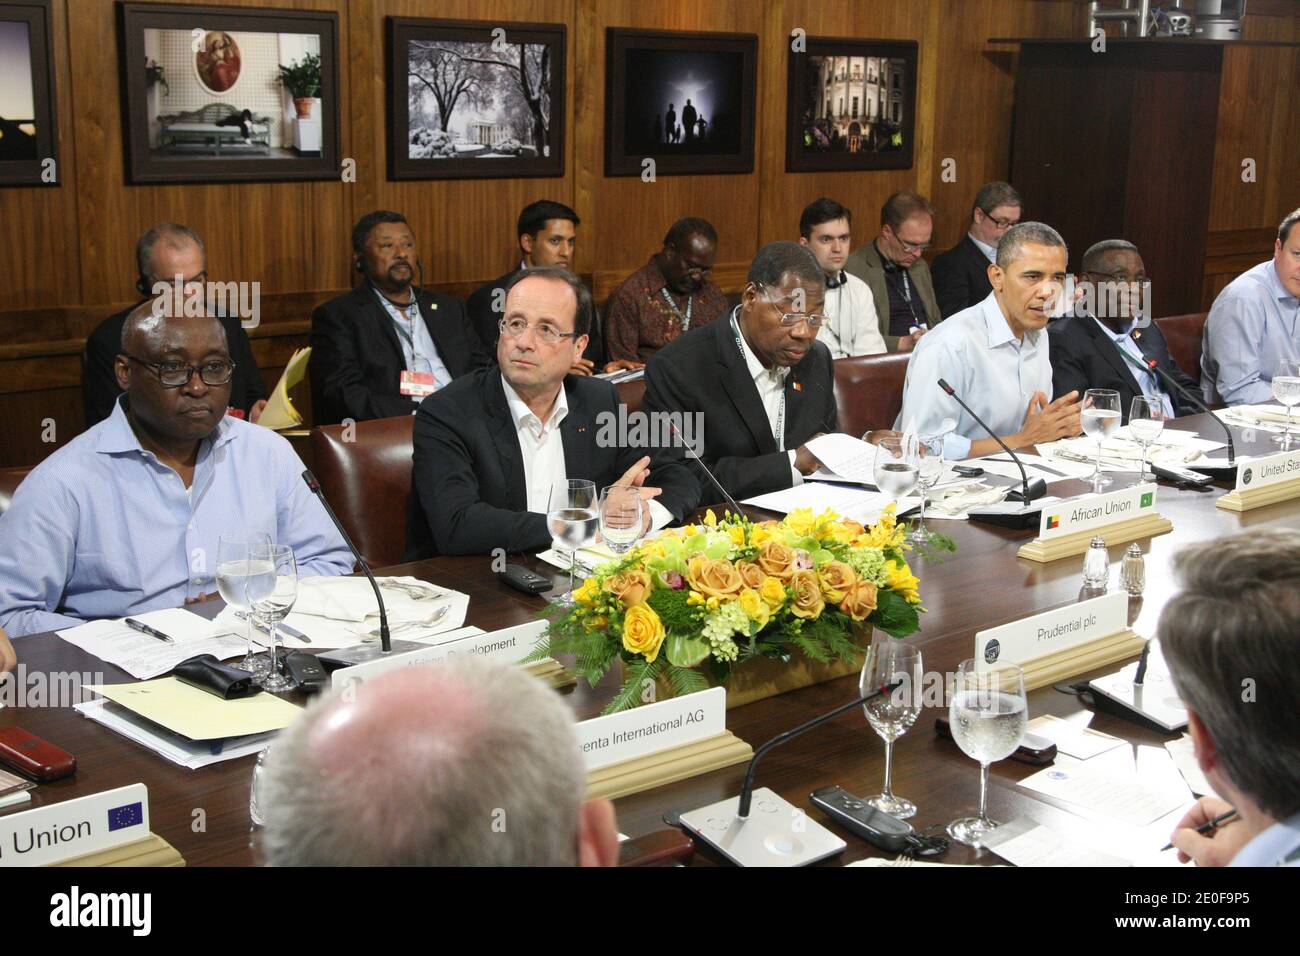 US President Barack Obama (C) hosts other G8 leaders and African leaders for a working lunch French president Francois Hollande is seen at left during the G8 summit at Camp David presidential retreat near Thurmont in Maryland, MD, USA, on May 19, 2012. Obama and other members of the Group of Eight nations met with African leaders to discus issues surrounding food security. Photo by Ludovic/Pool/ABACAPRESS.COM Stock Photo